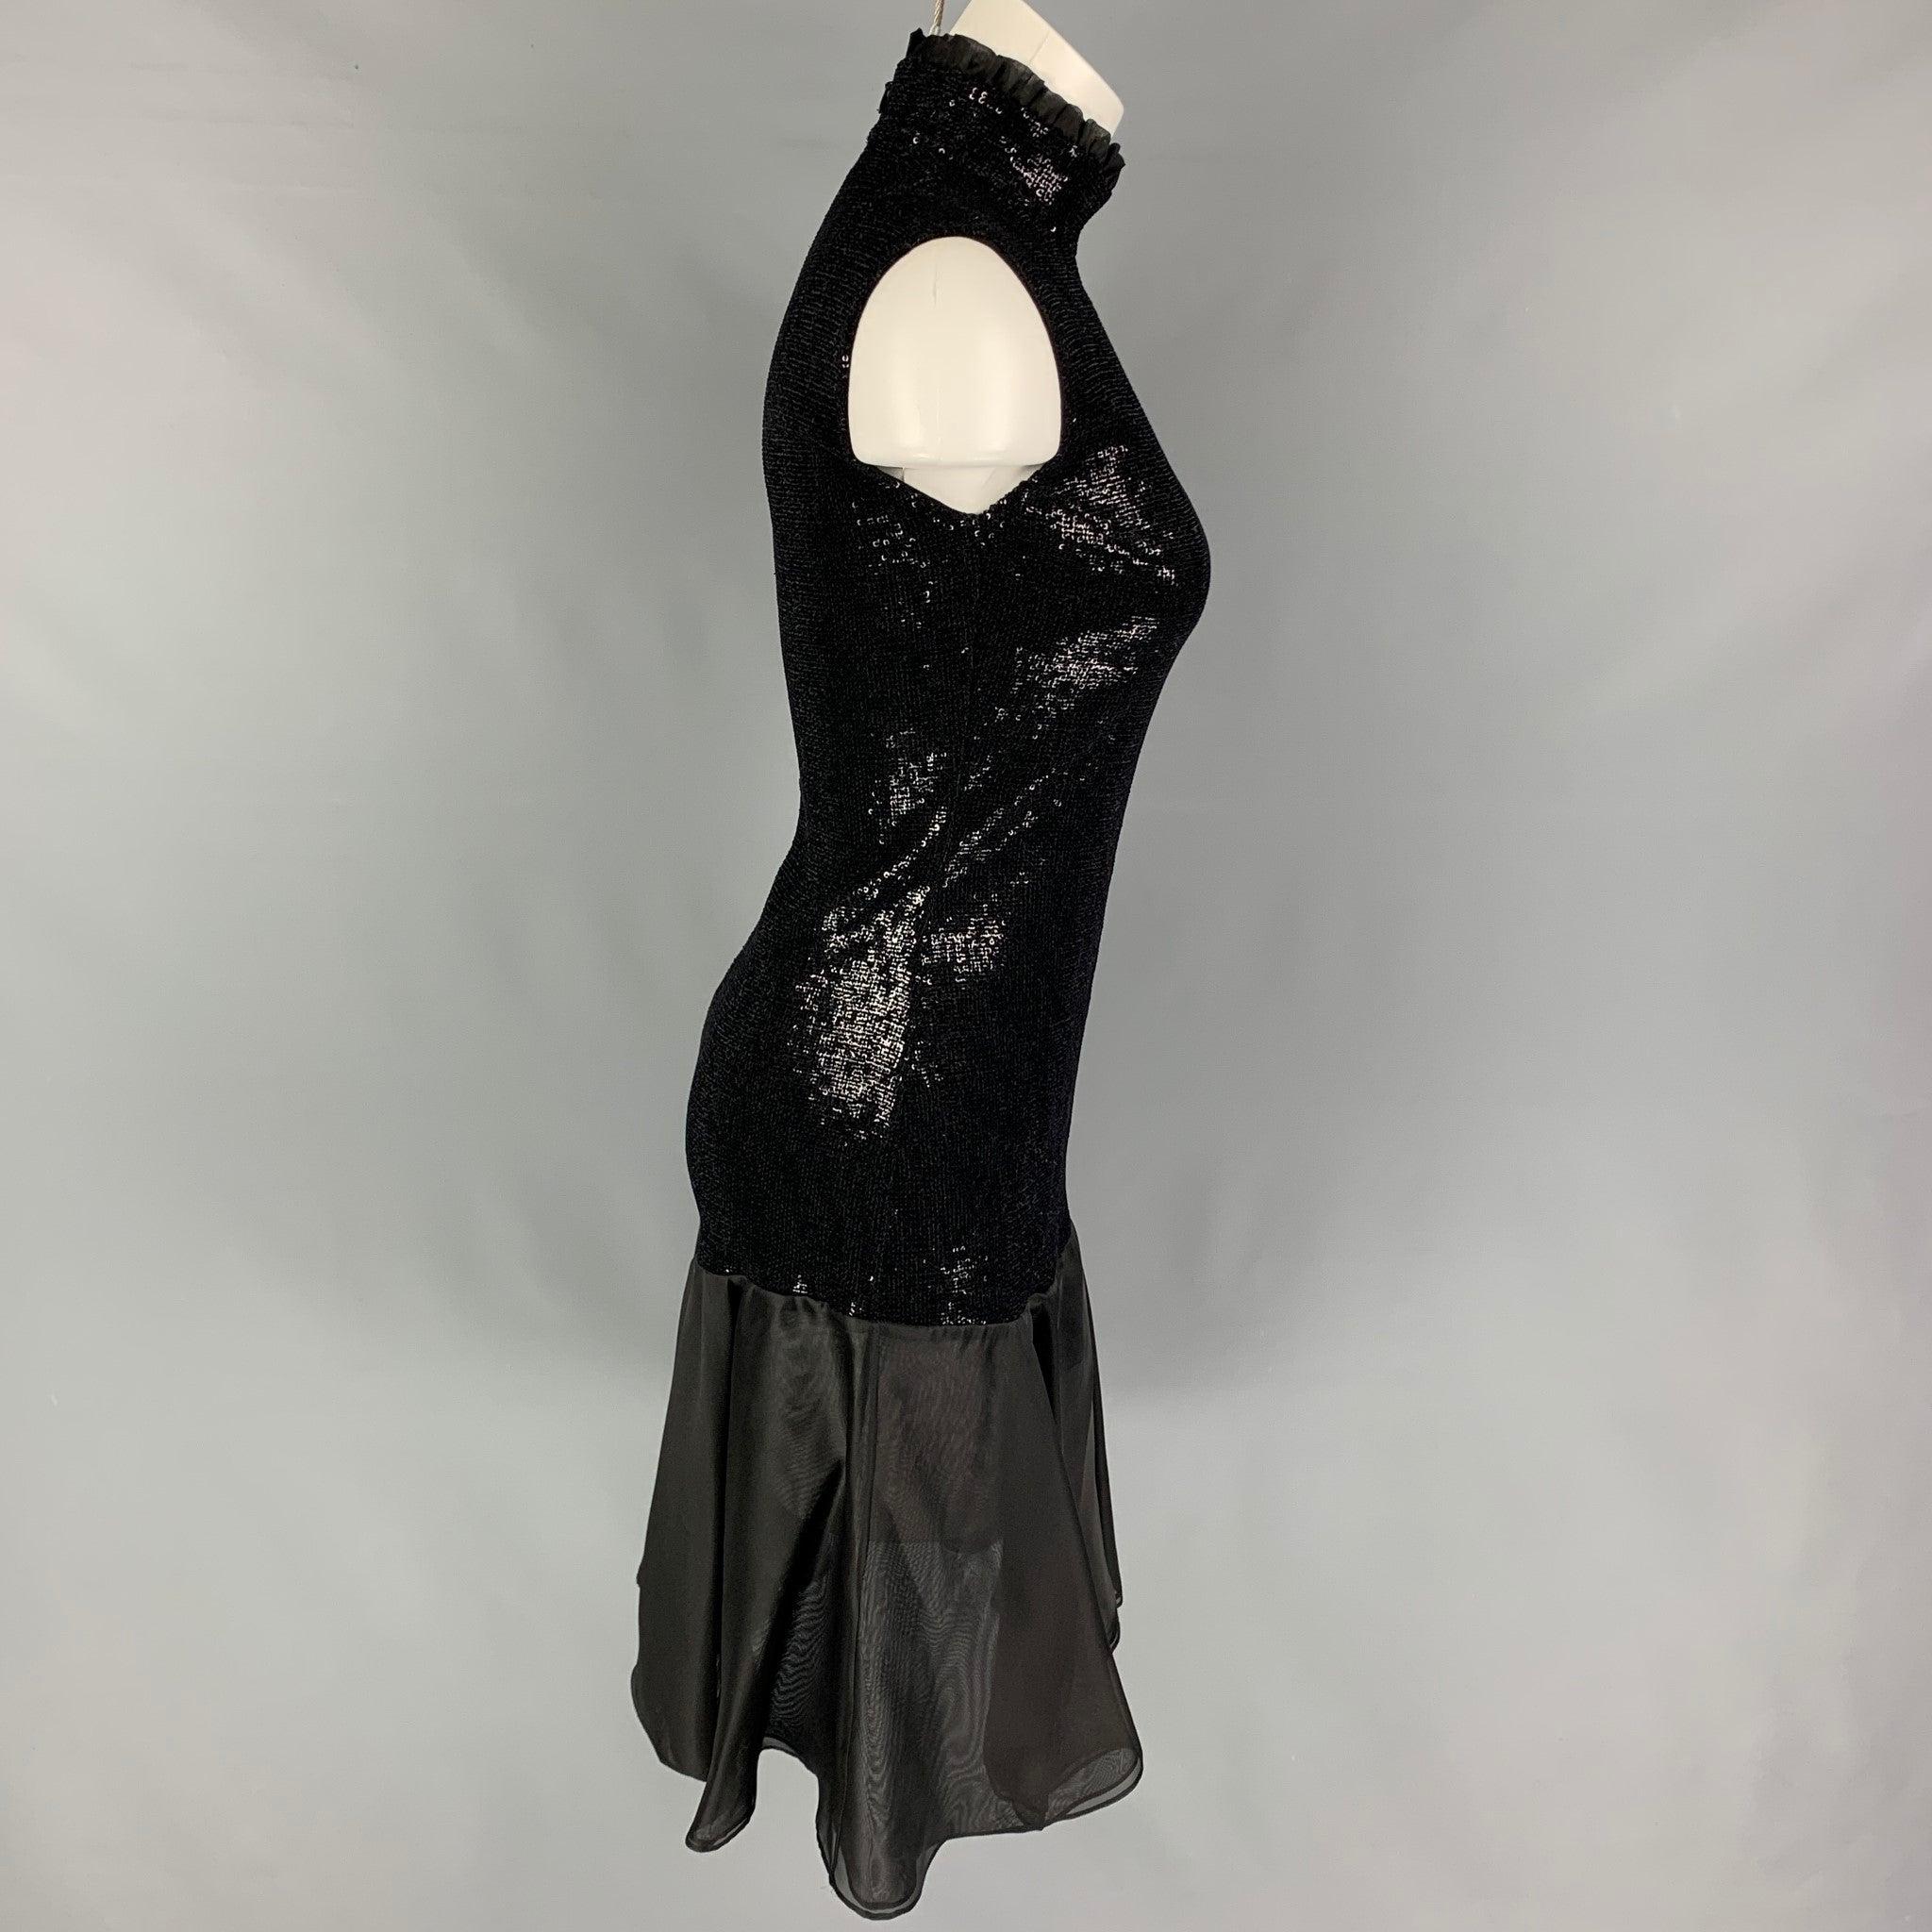 GIORGIO ARMANI dress comes in a black sequined viscose blend featuring a high collar, sleeveless, flared hem, and a back zip up closure. Made in Italy.
Very Good
Pre-Owned Condition. 

Marked:   38 

Measurements: 
 
Shoulder: 15 inches  Bust: 28